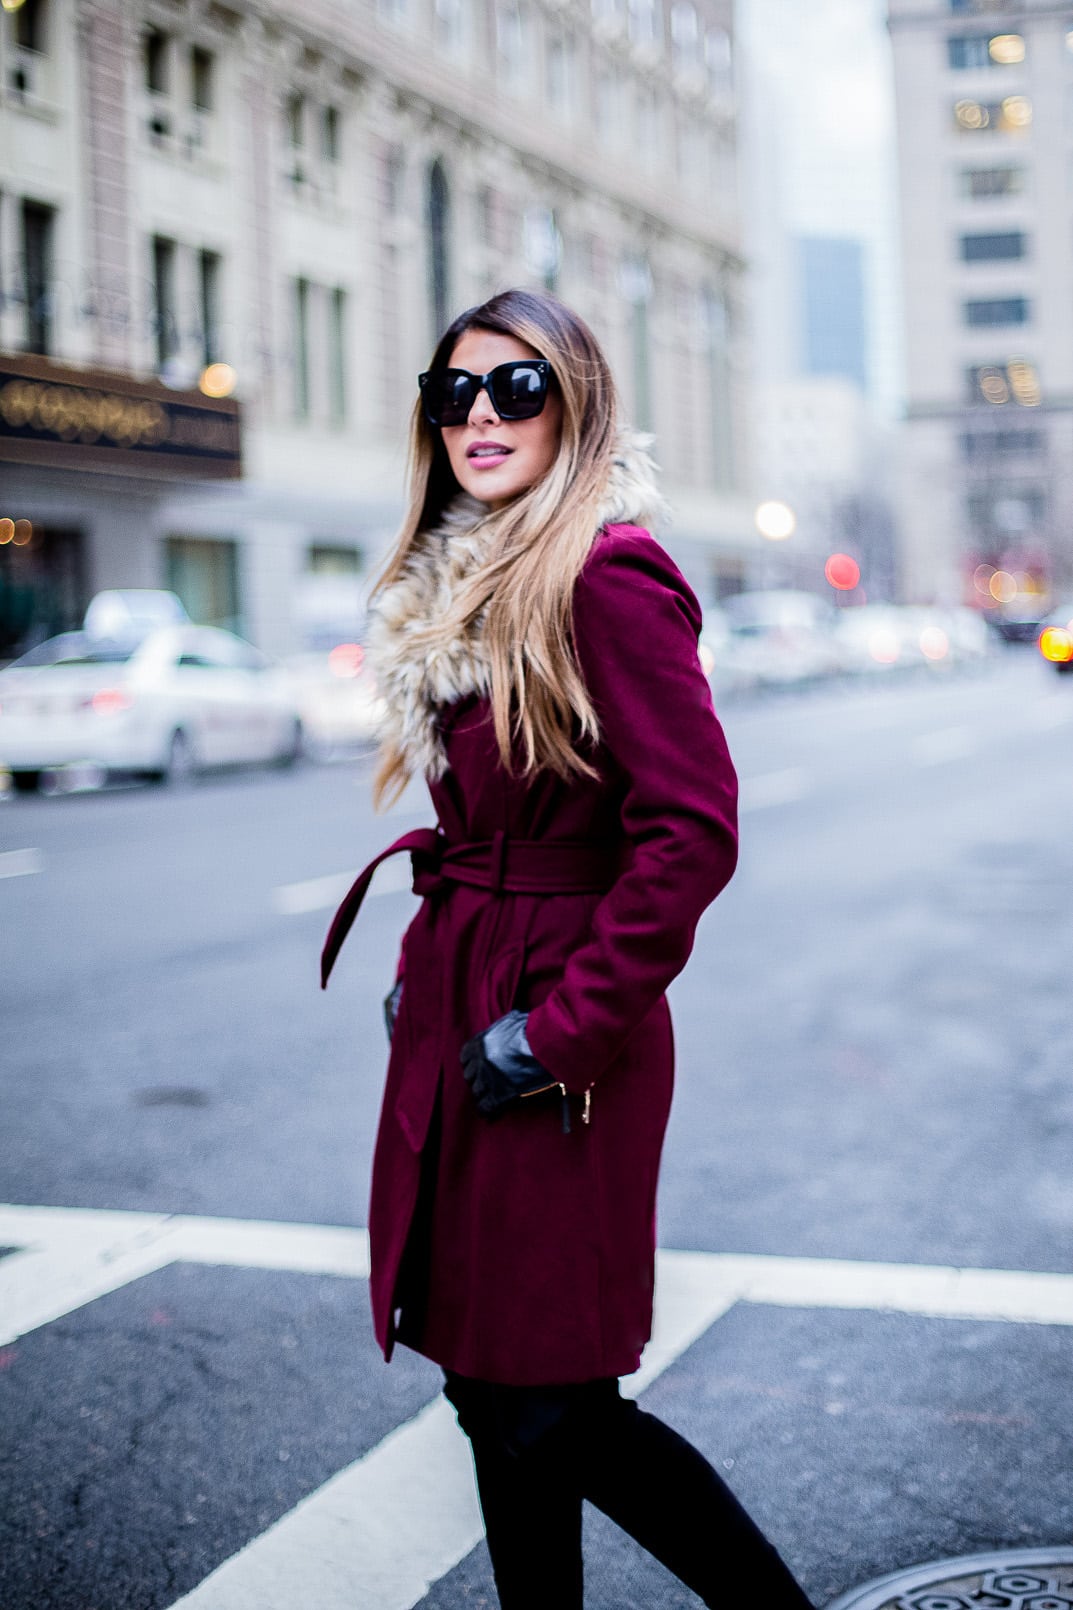 Pam Hetlinger, The Girl From Panama wearing a Faux-Fur Collared Long coat, Faux-leather leggings, delman over the knee boots, and celine sunglasses.